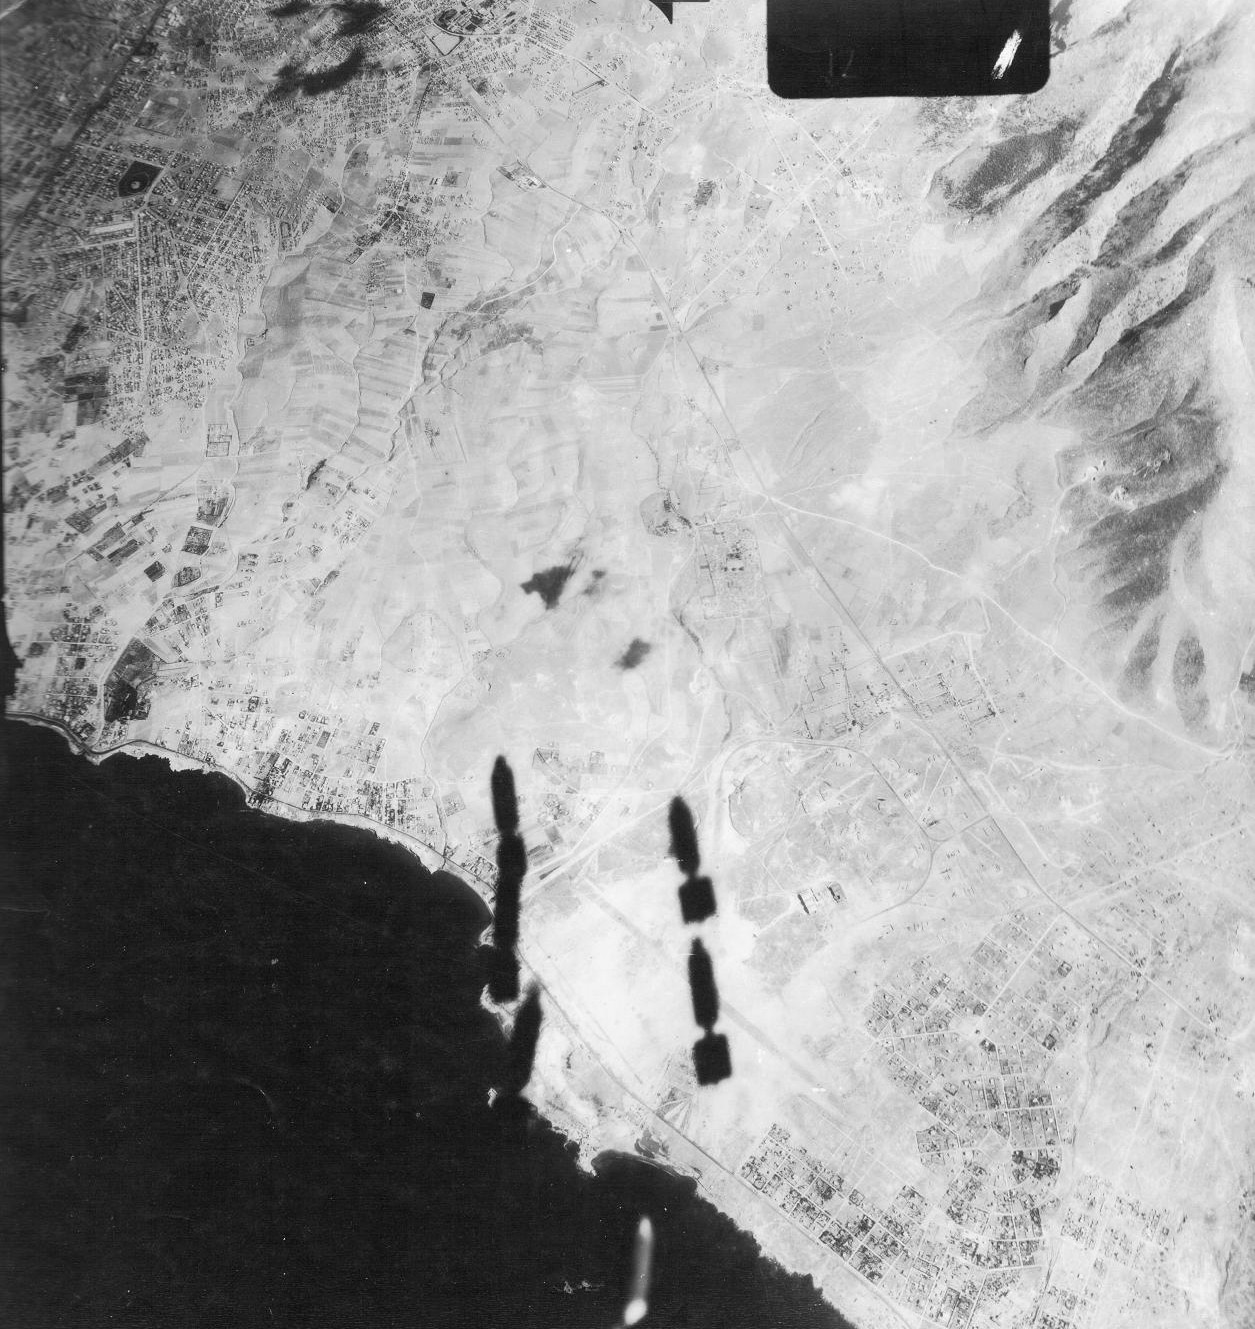 Bombing of Kalamaki Airfield, Athens, Greece, seen from the bomb bay of a US B-17 bomber, 15 Sep 1944